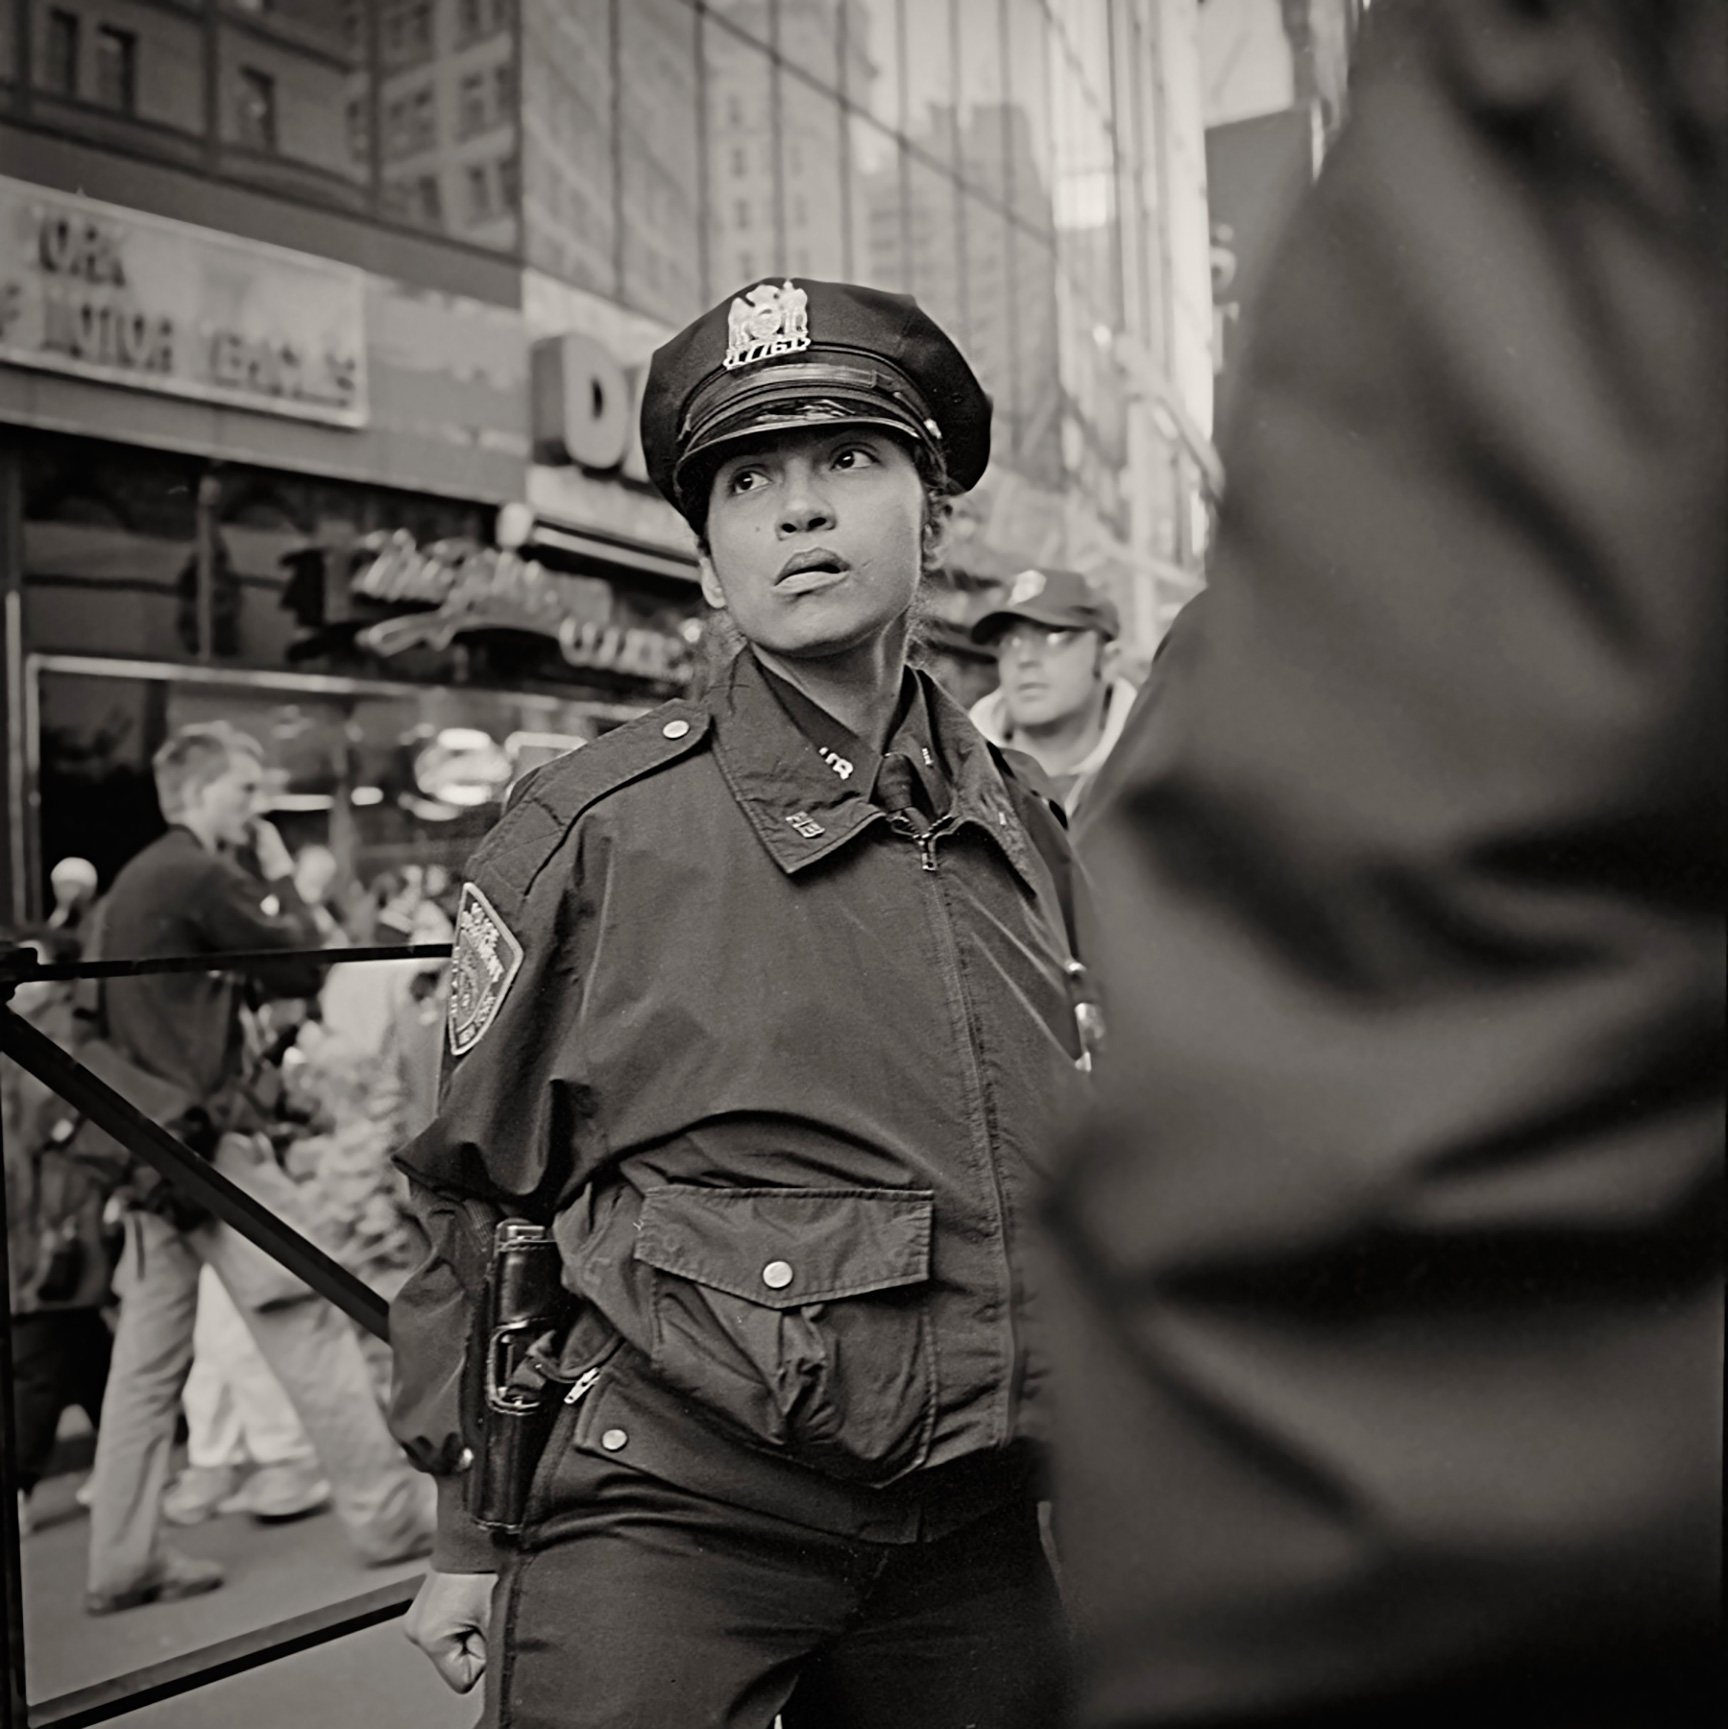 policewoman-at-protest-march.jpg